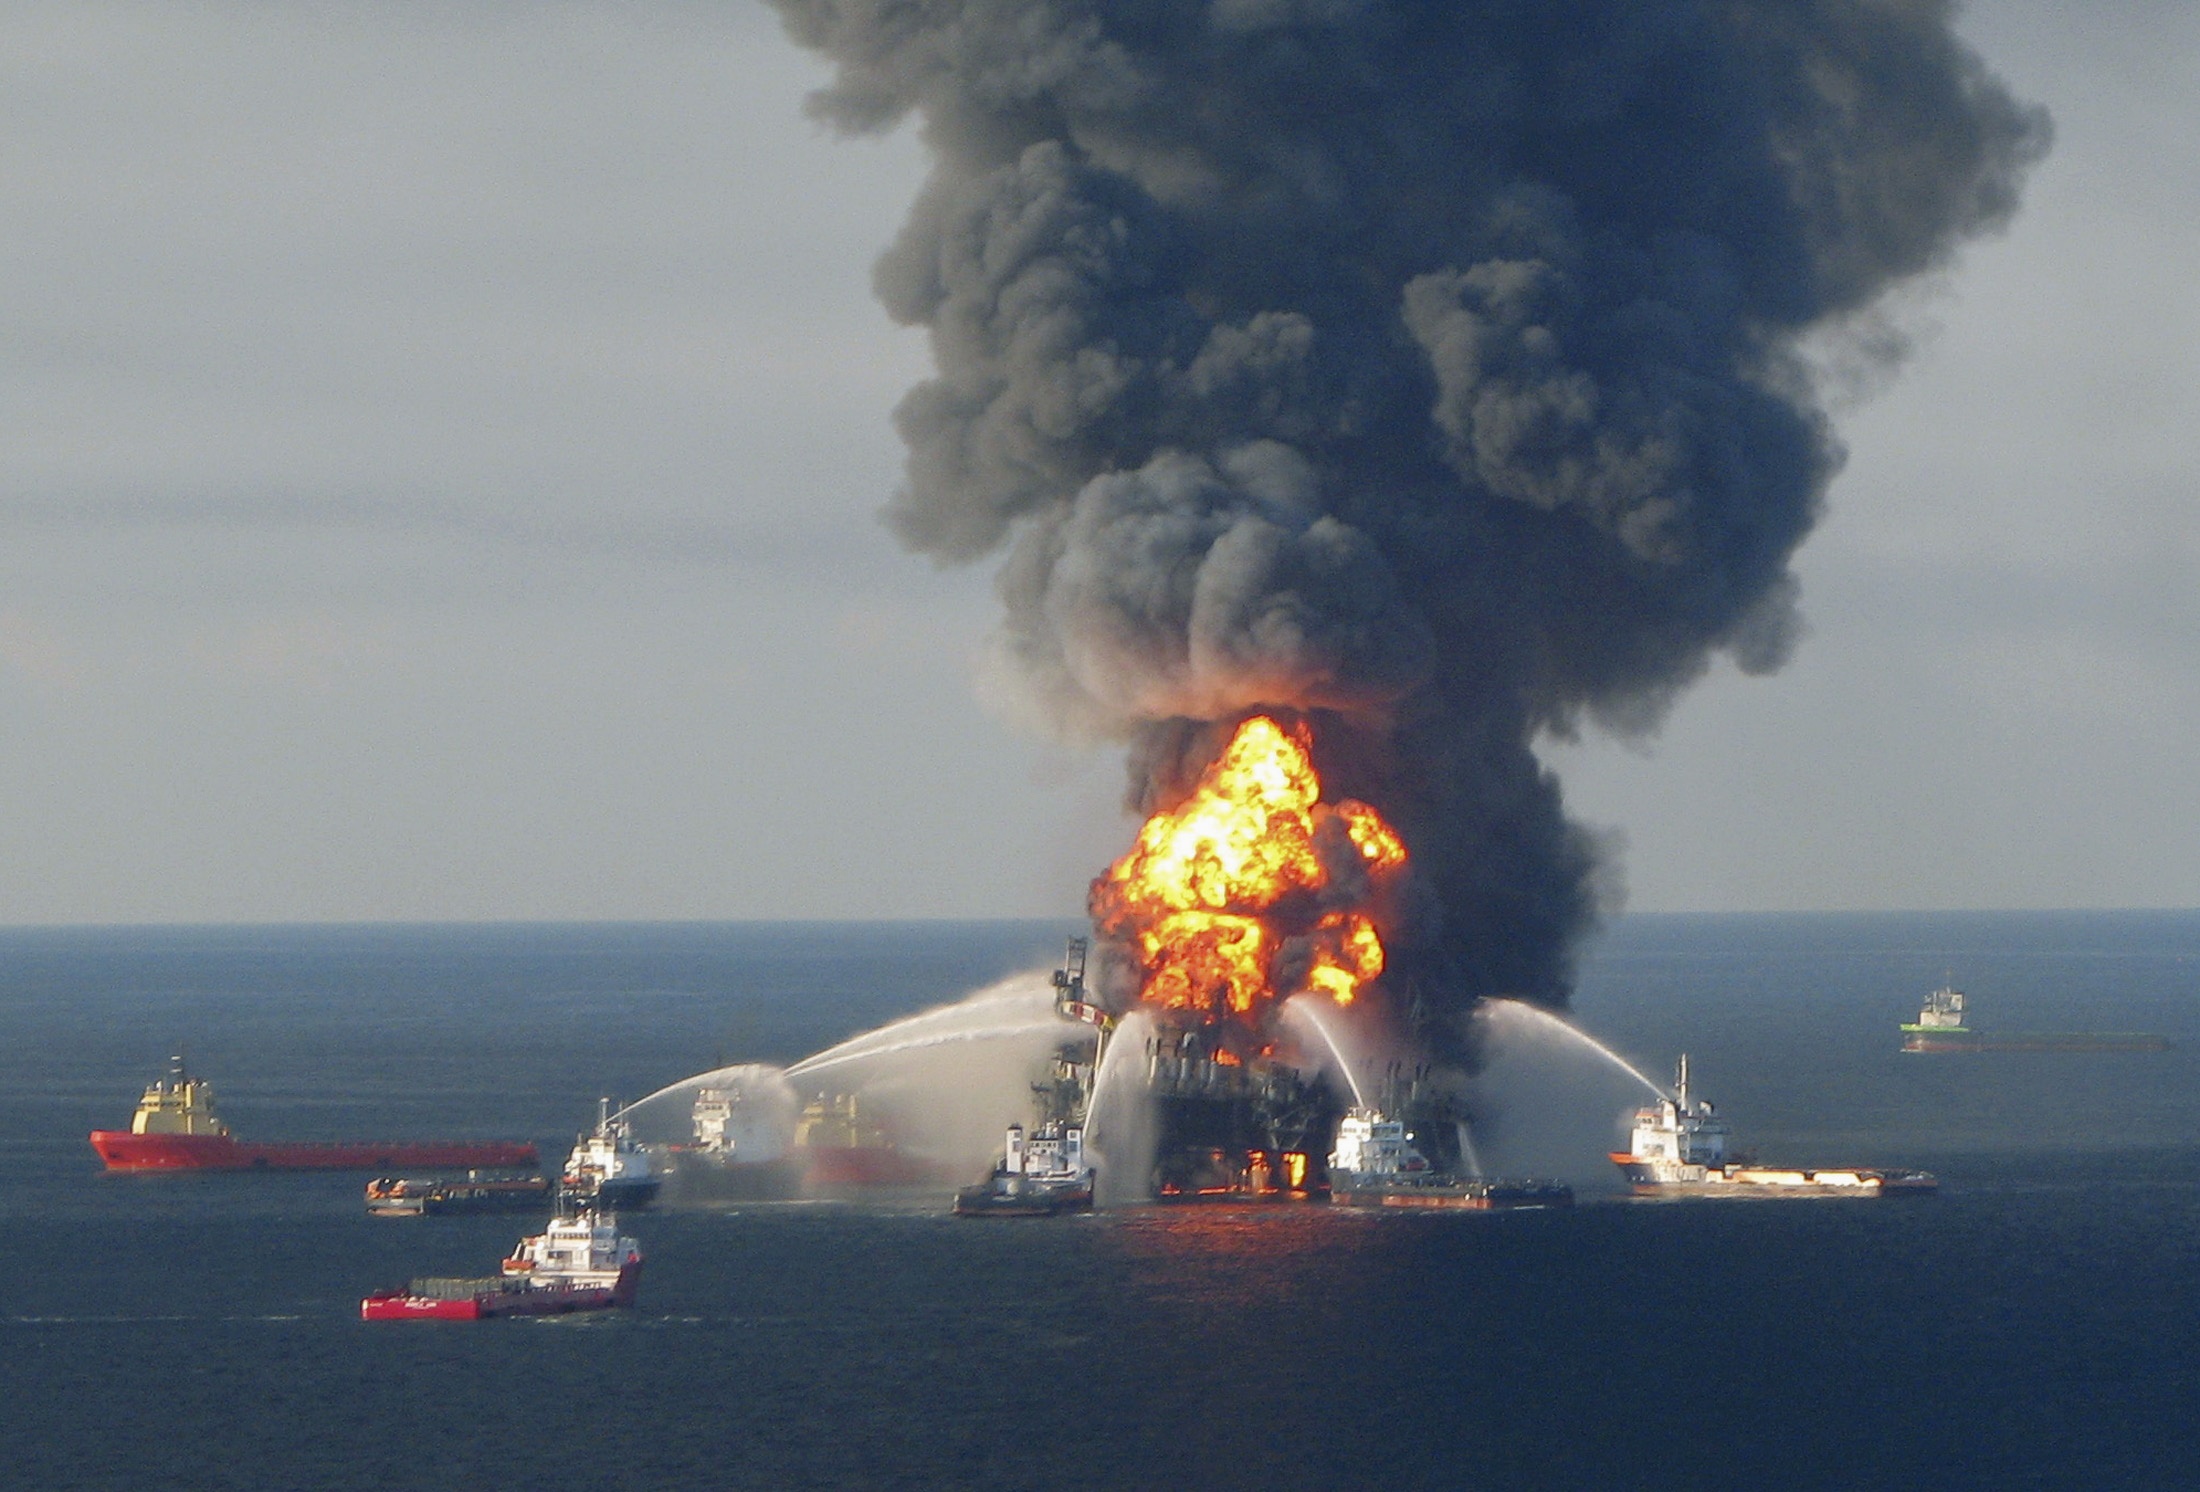 An explosion on a rig in the Gulf of Mexico killed 11 crewmen, and caused the largest oil ppill in US history. Photo: Reuters